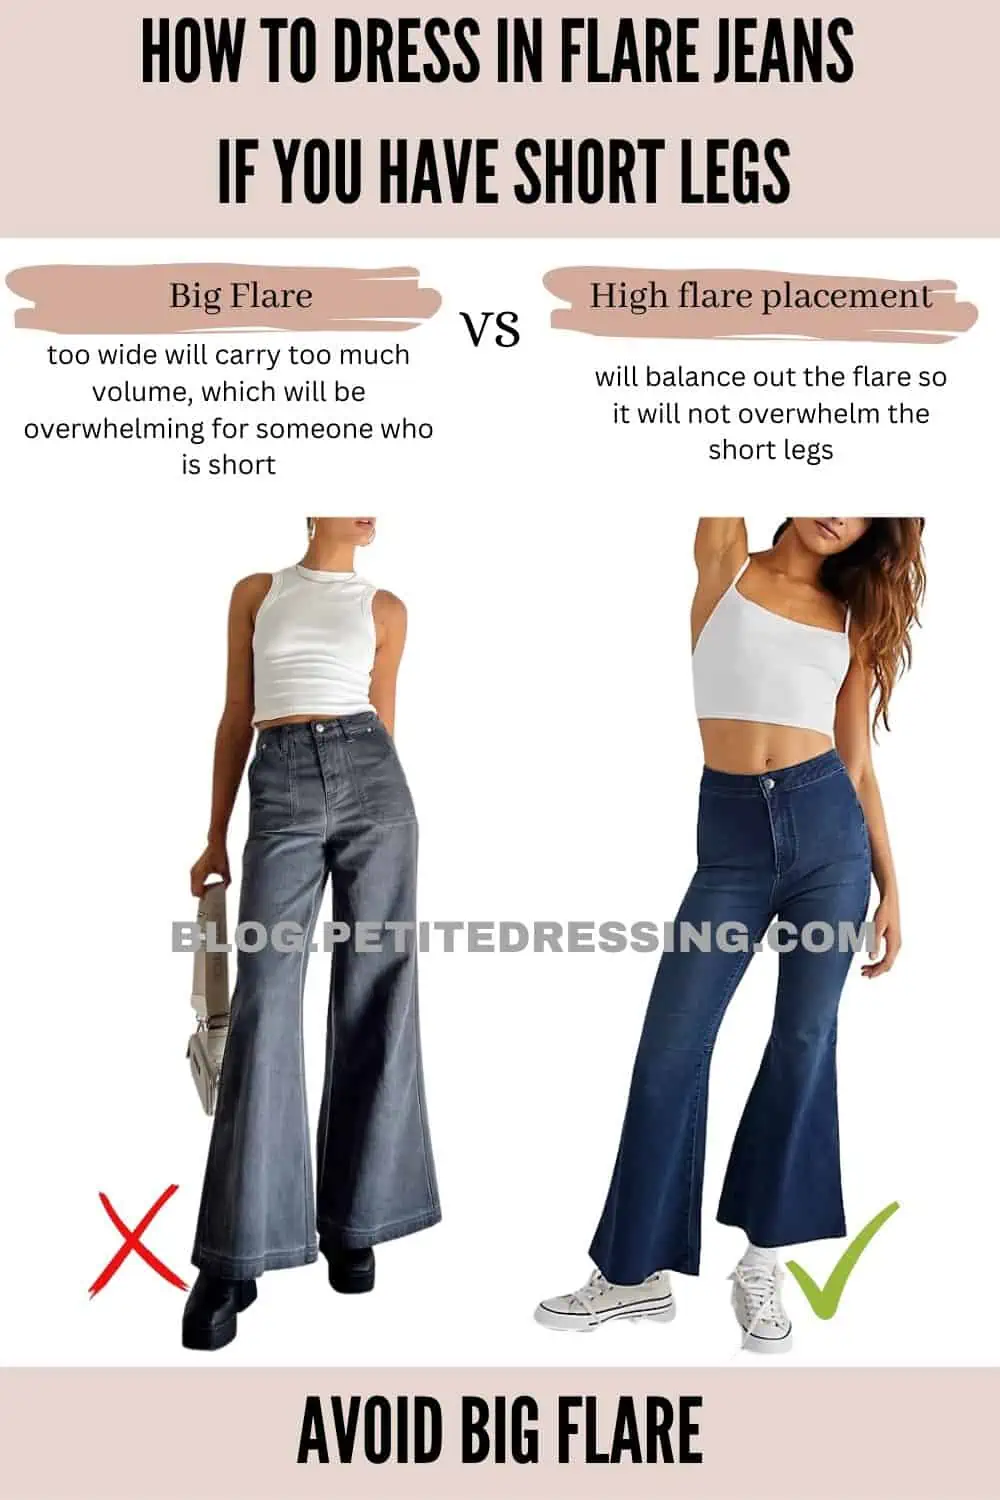 Types of Flare Jeans for Short Legs